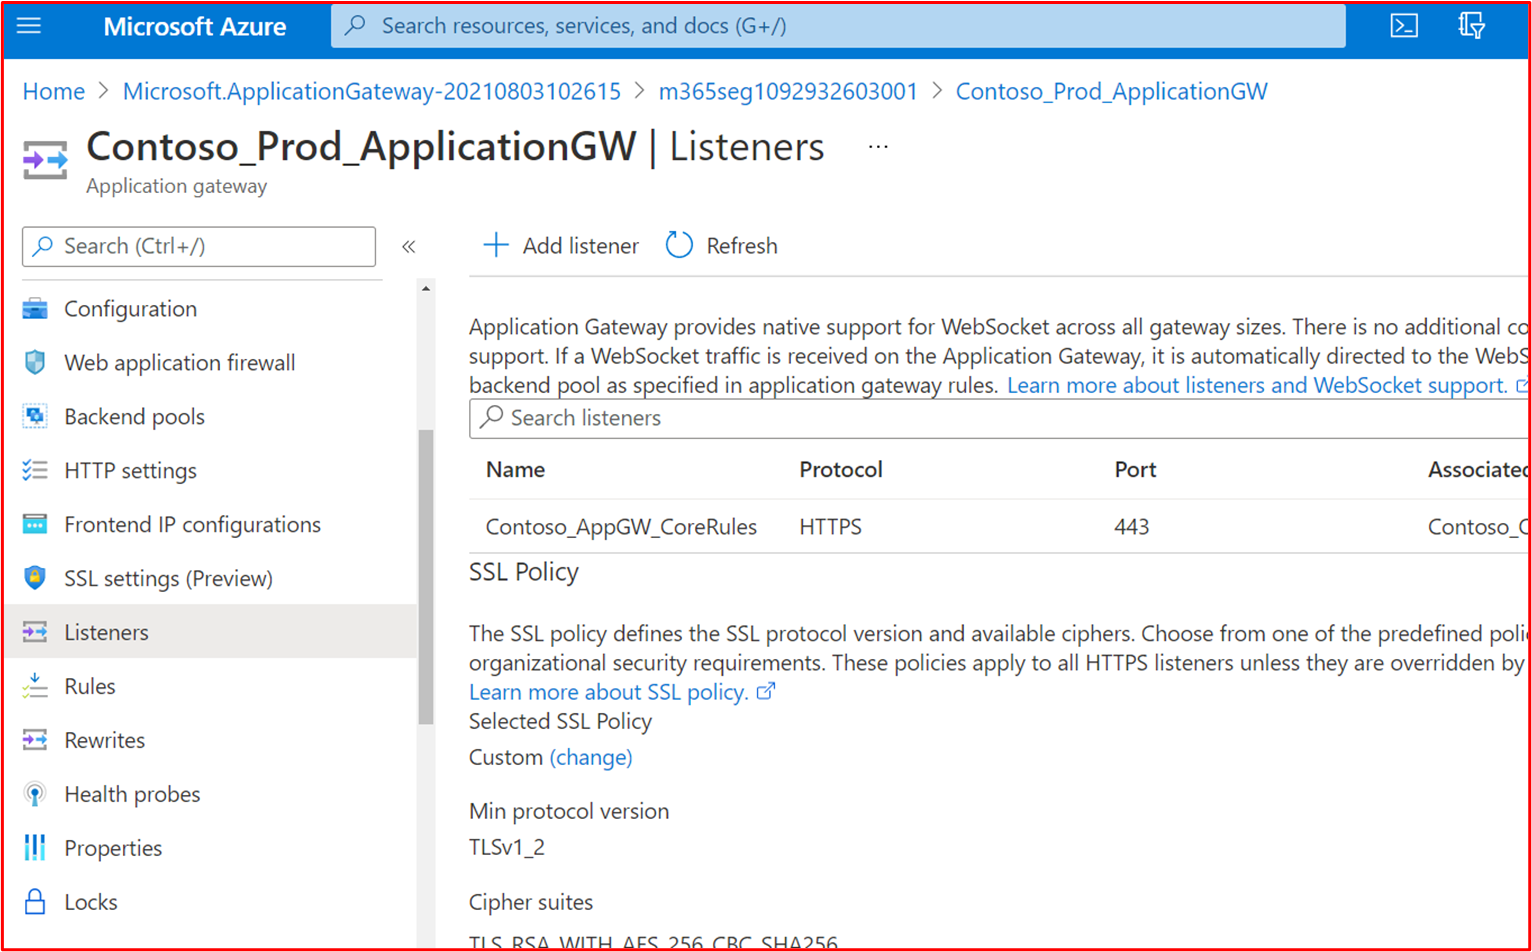 screenshot shows this configured for the Contoso Production Azure Application Gateway.